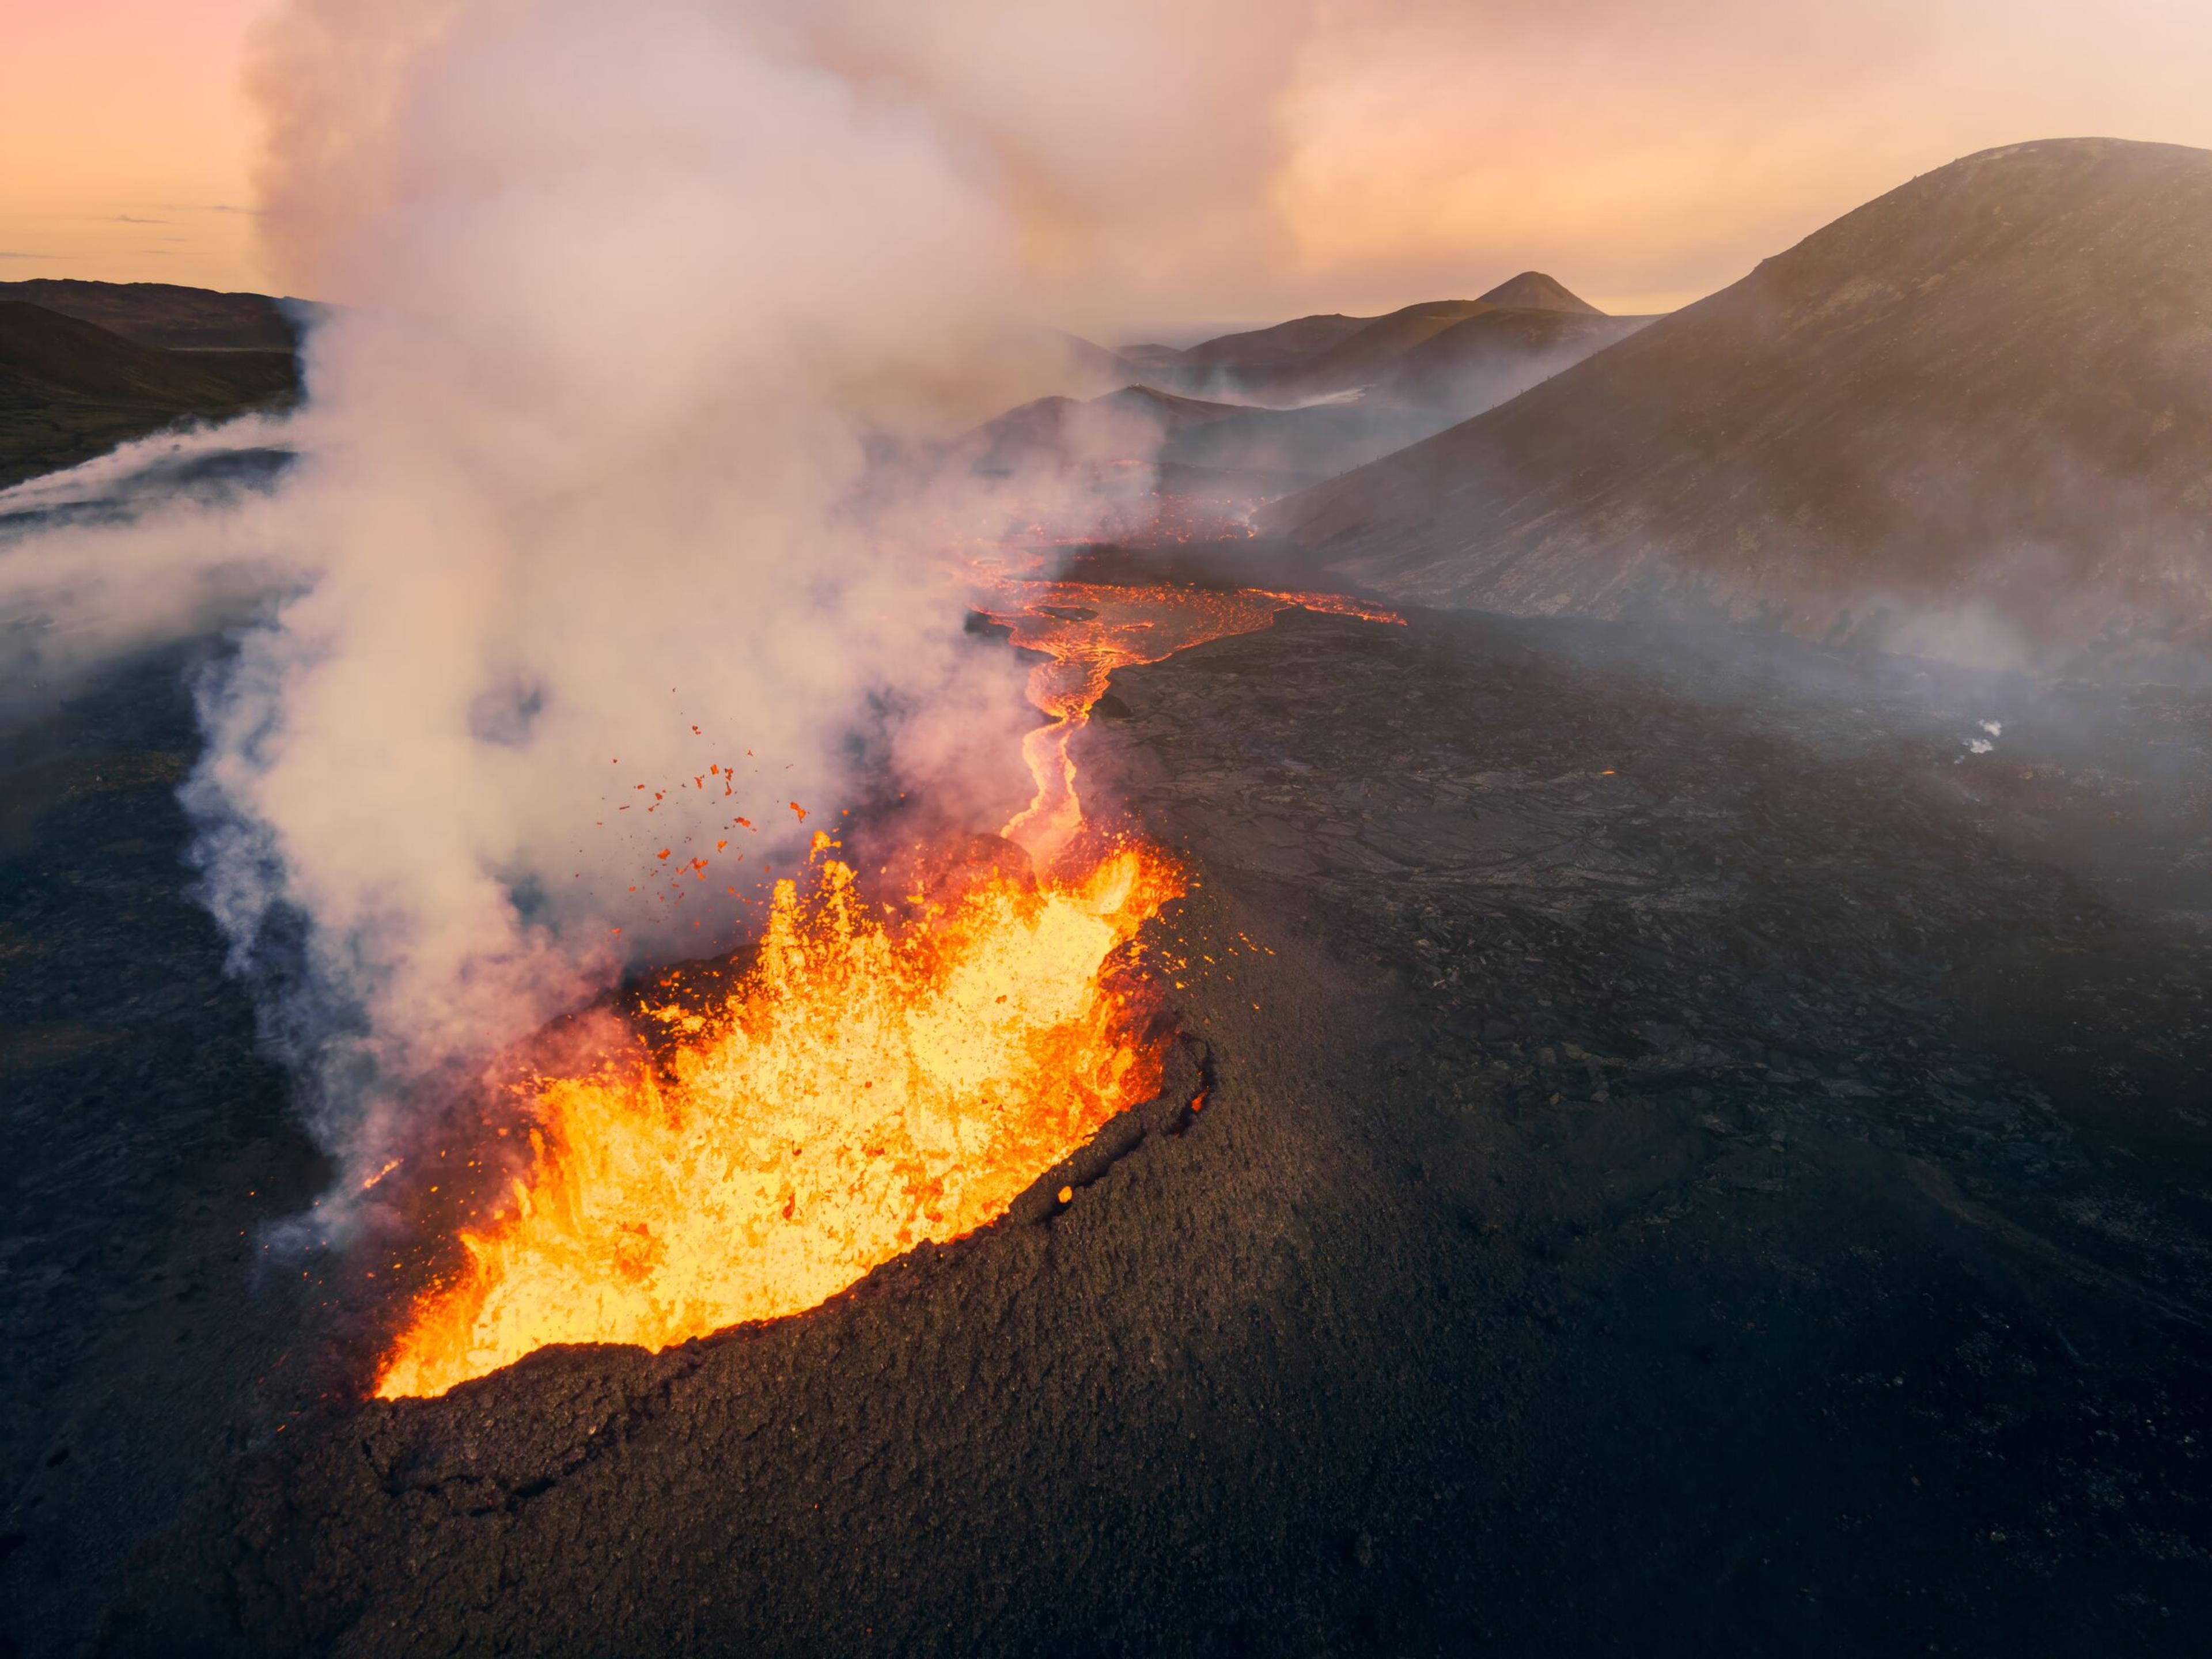 A fiery volcanic eruption with bright orange lava flowing and smoke rising against a backdrop of mountainous terrain during sunset.